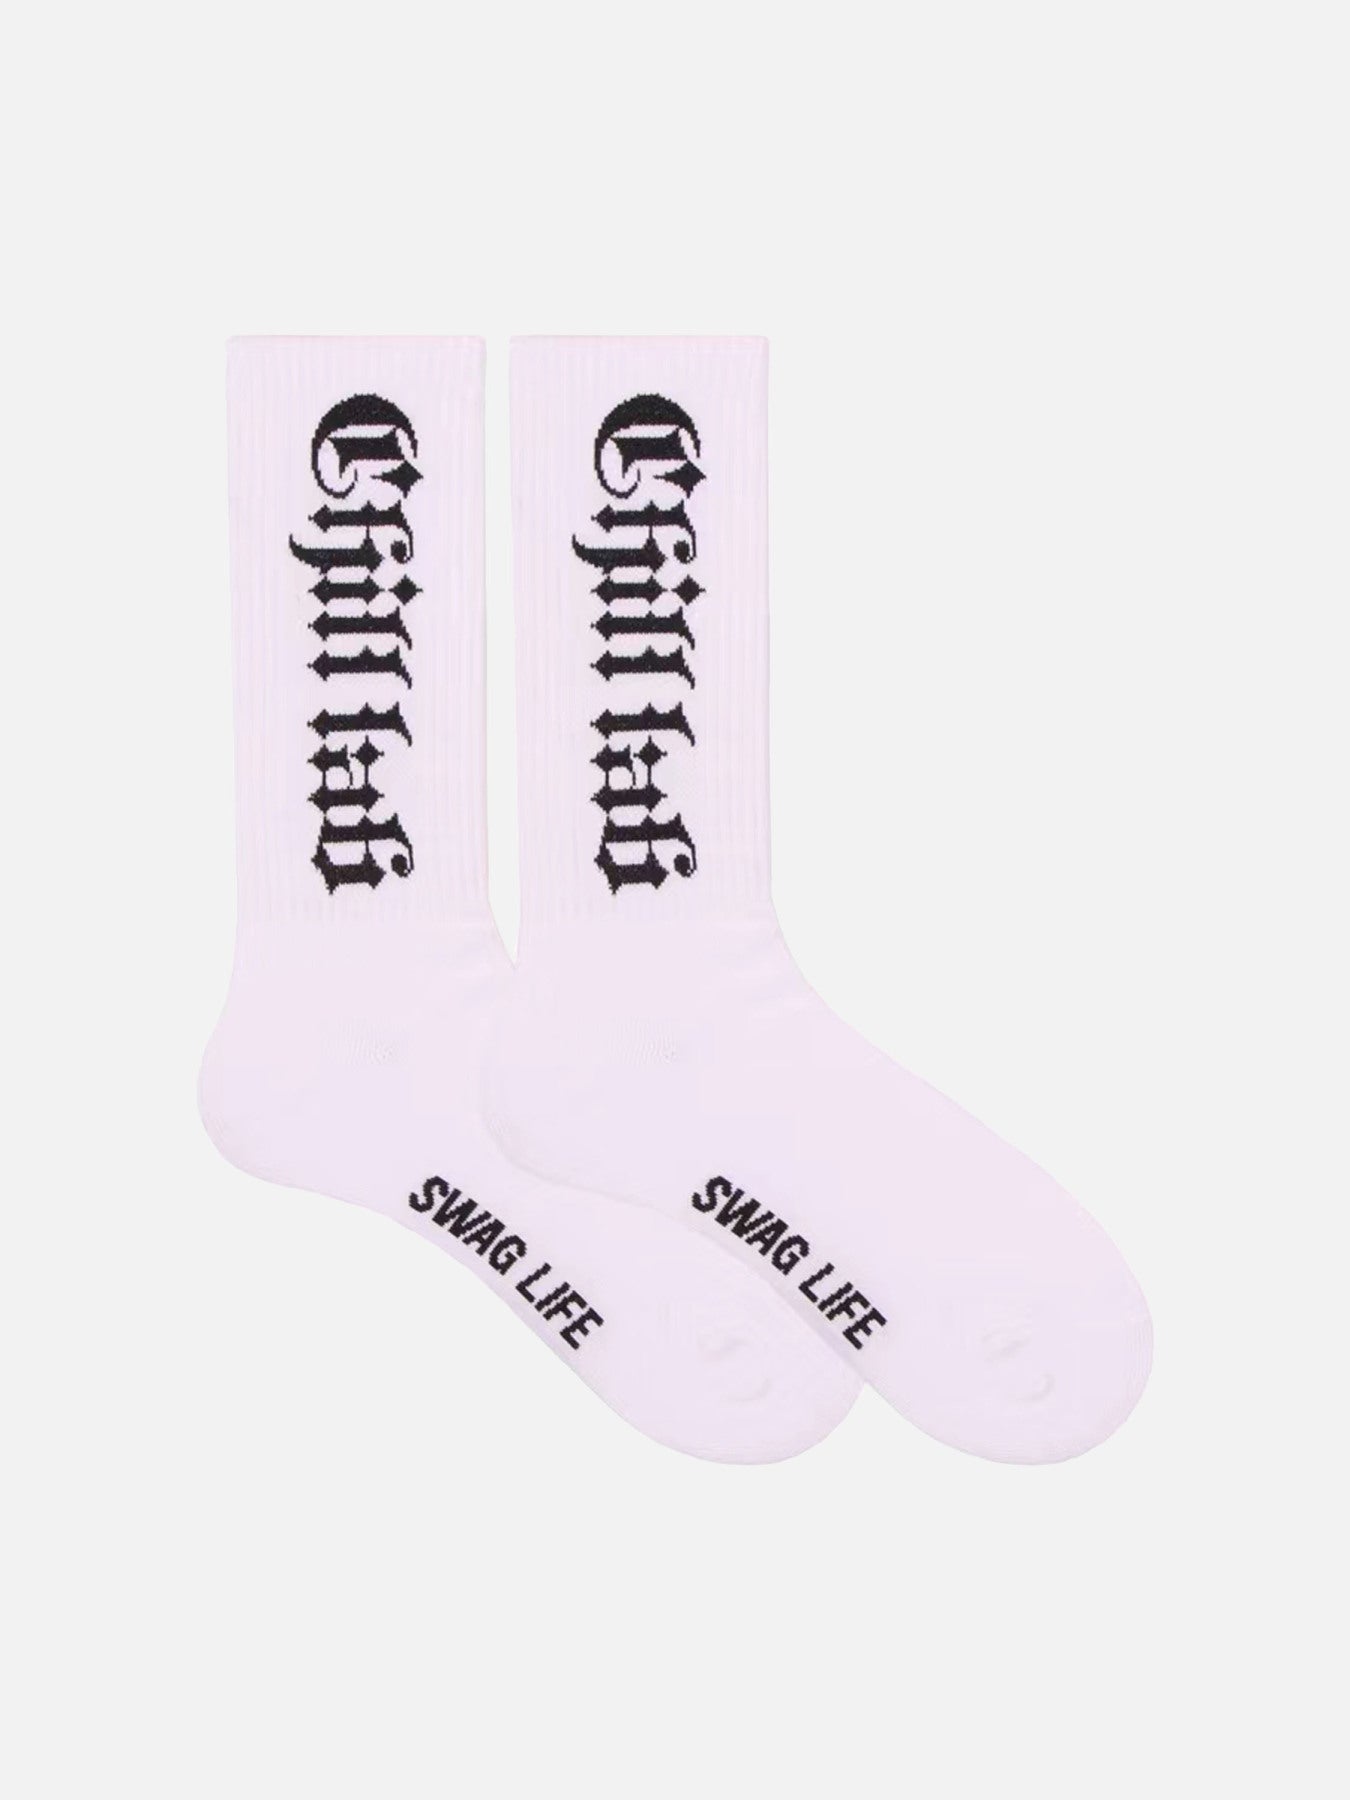 The Supermade Street Hip Hop Gothic Font Stockings